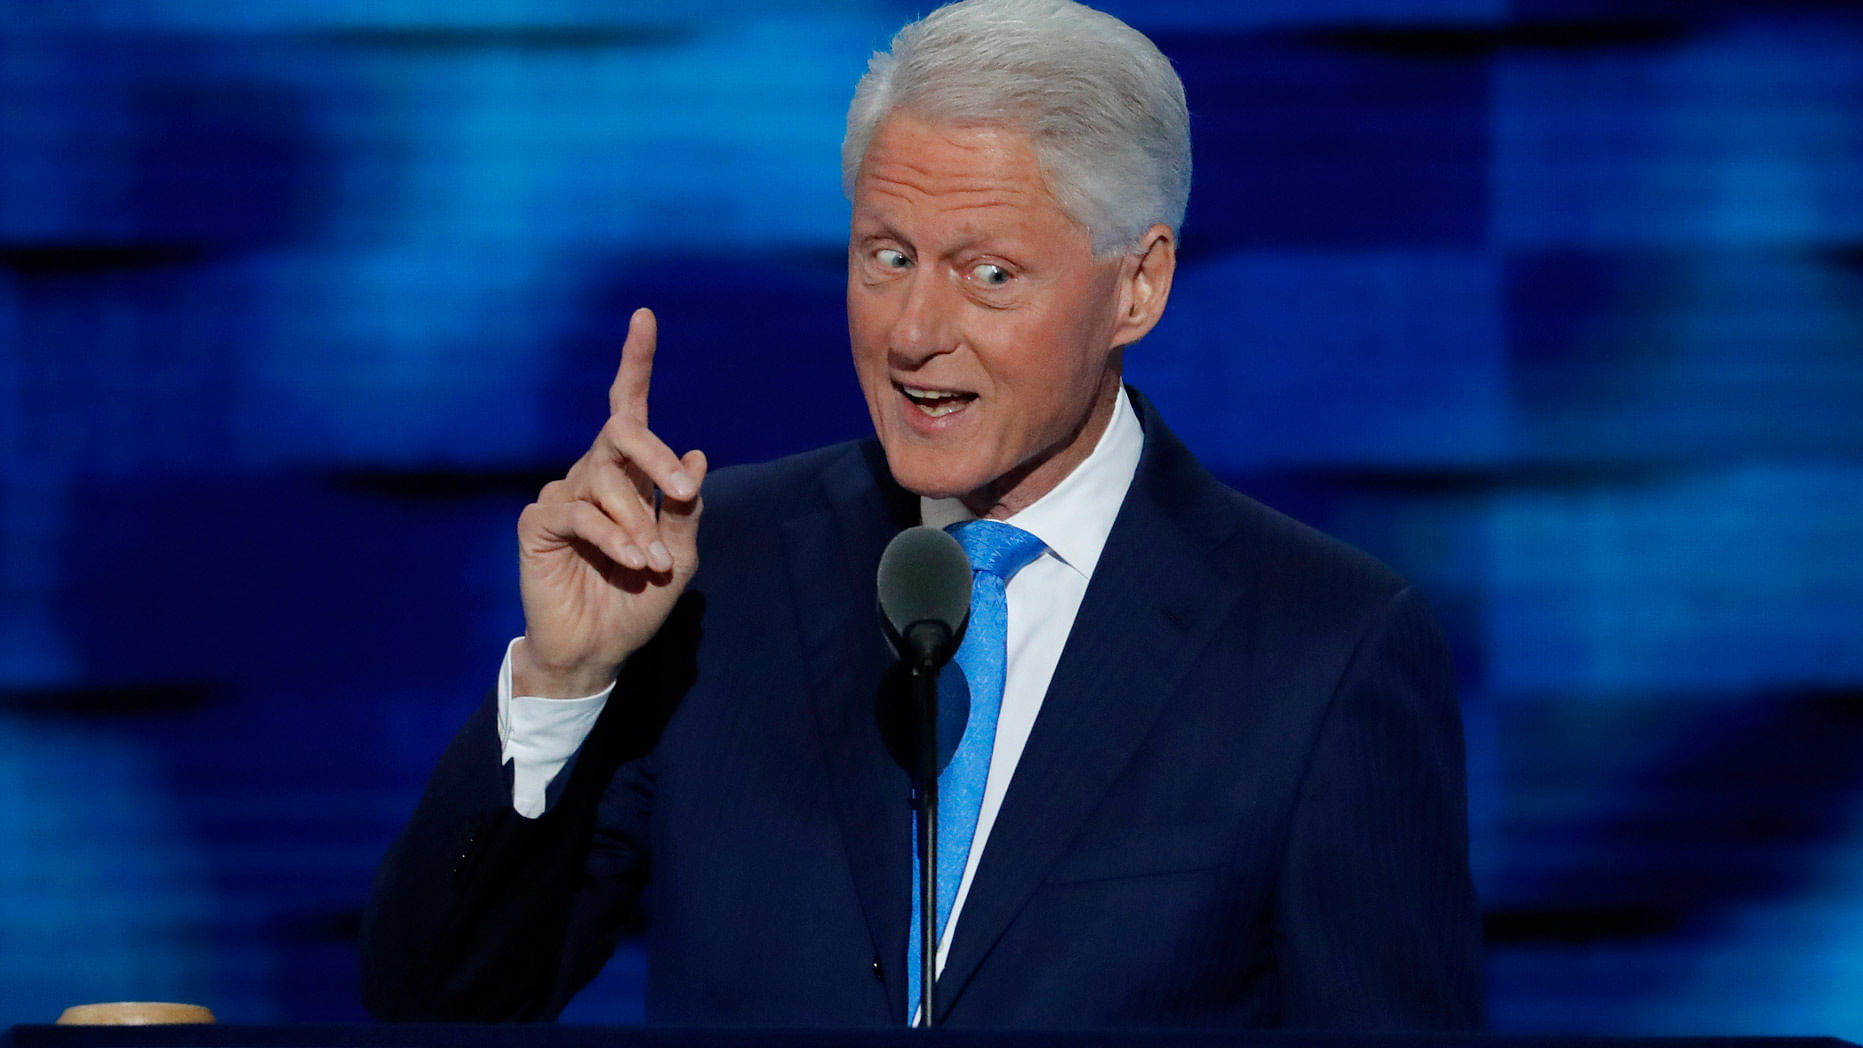 Bill Clinton speaking at the Democratic National Convention’s second day on Tuesday. (Photo: AP)